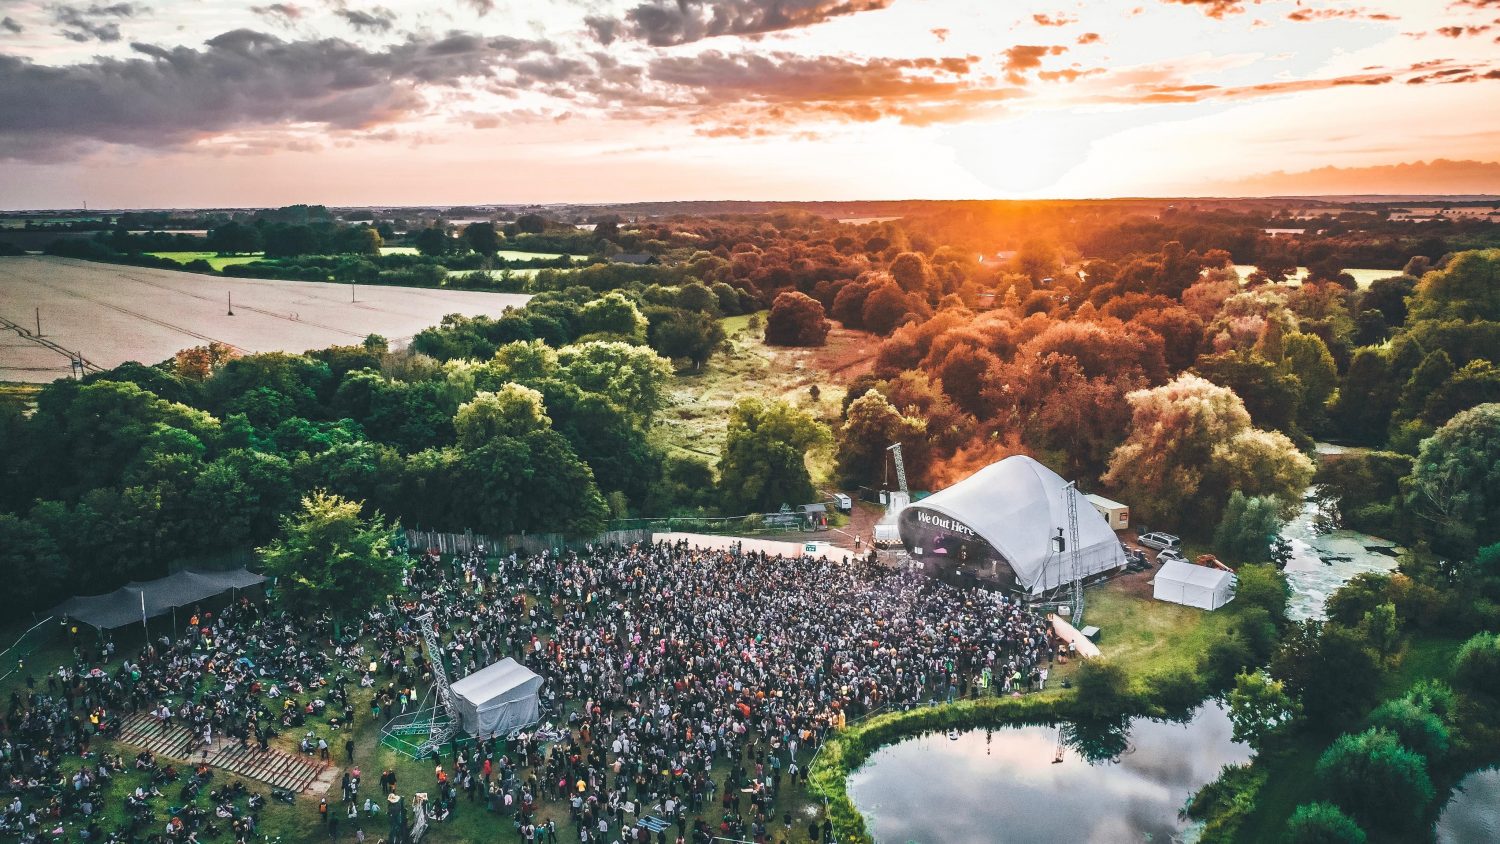 An aerial view of an outdoor concert, featuring advanced audio production, nestled in lush greenery, with a large crowd gathered by the stage as the sun sets on the horizon.